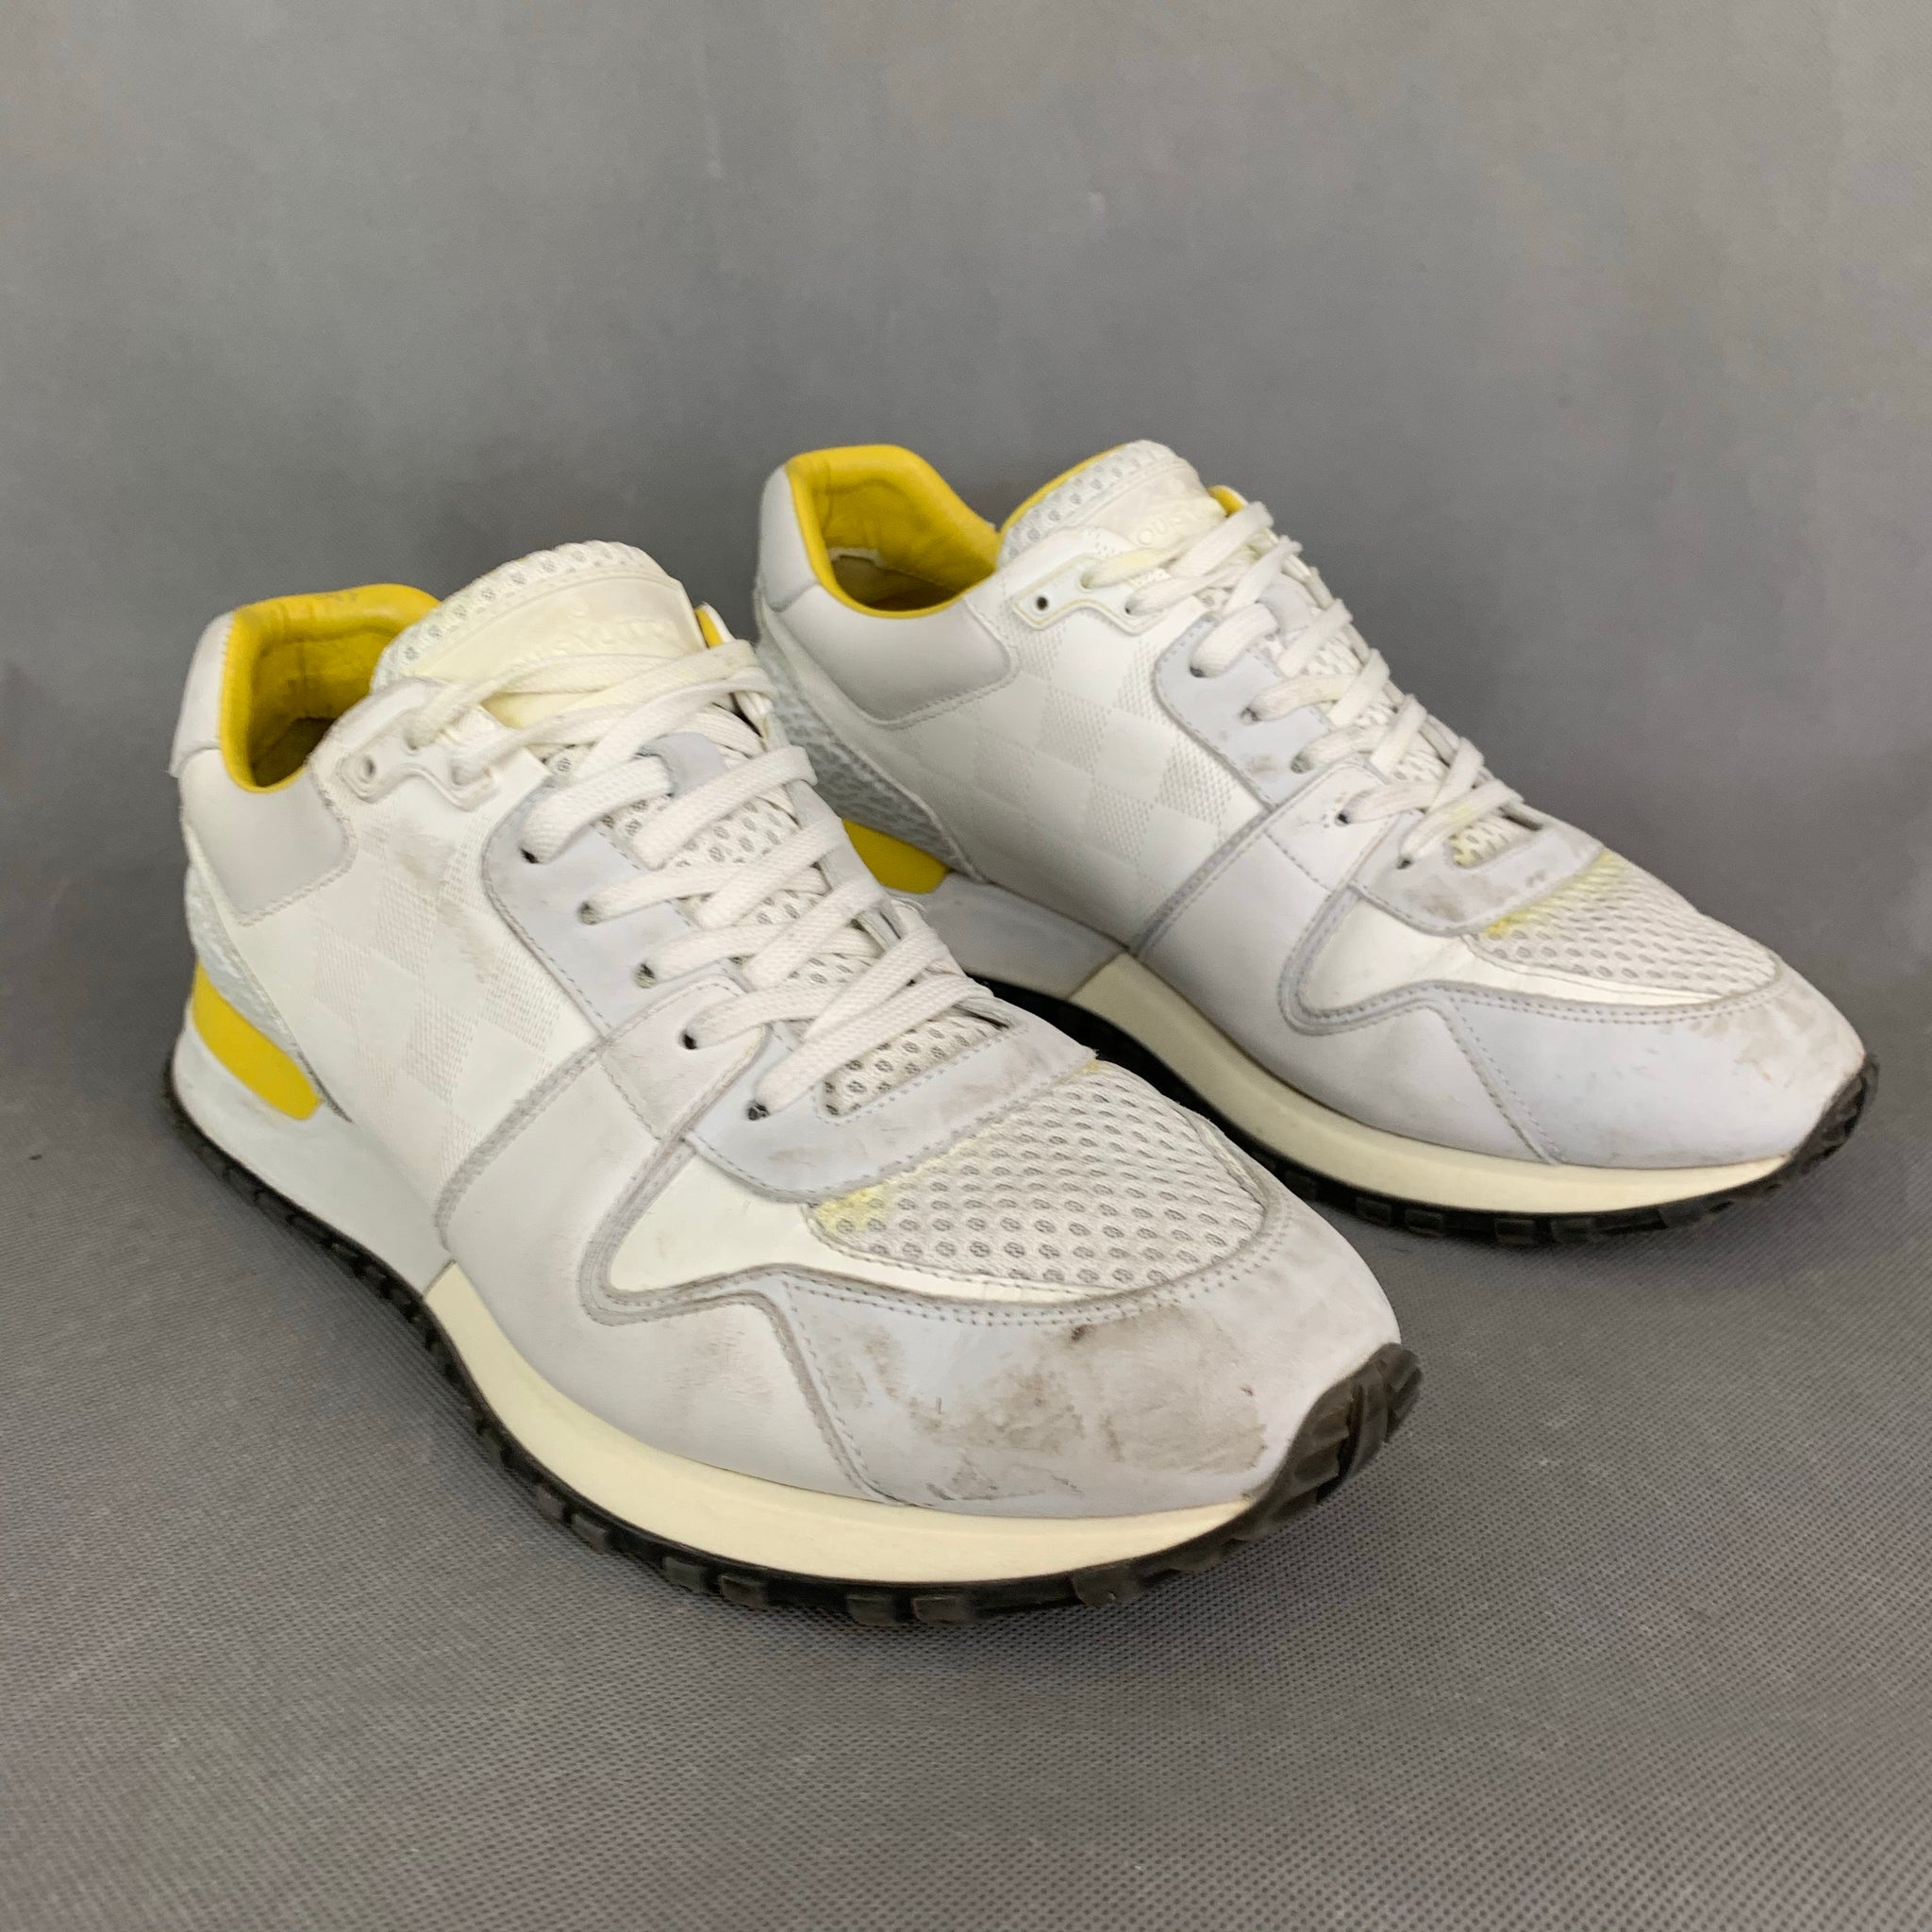 Louis Vuitton Trainer Low White Rose 1AA6W3 - Size UK 6